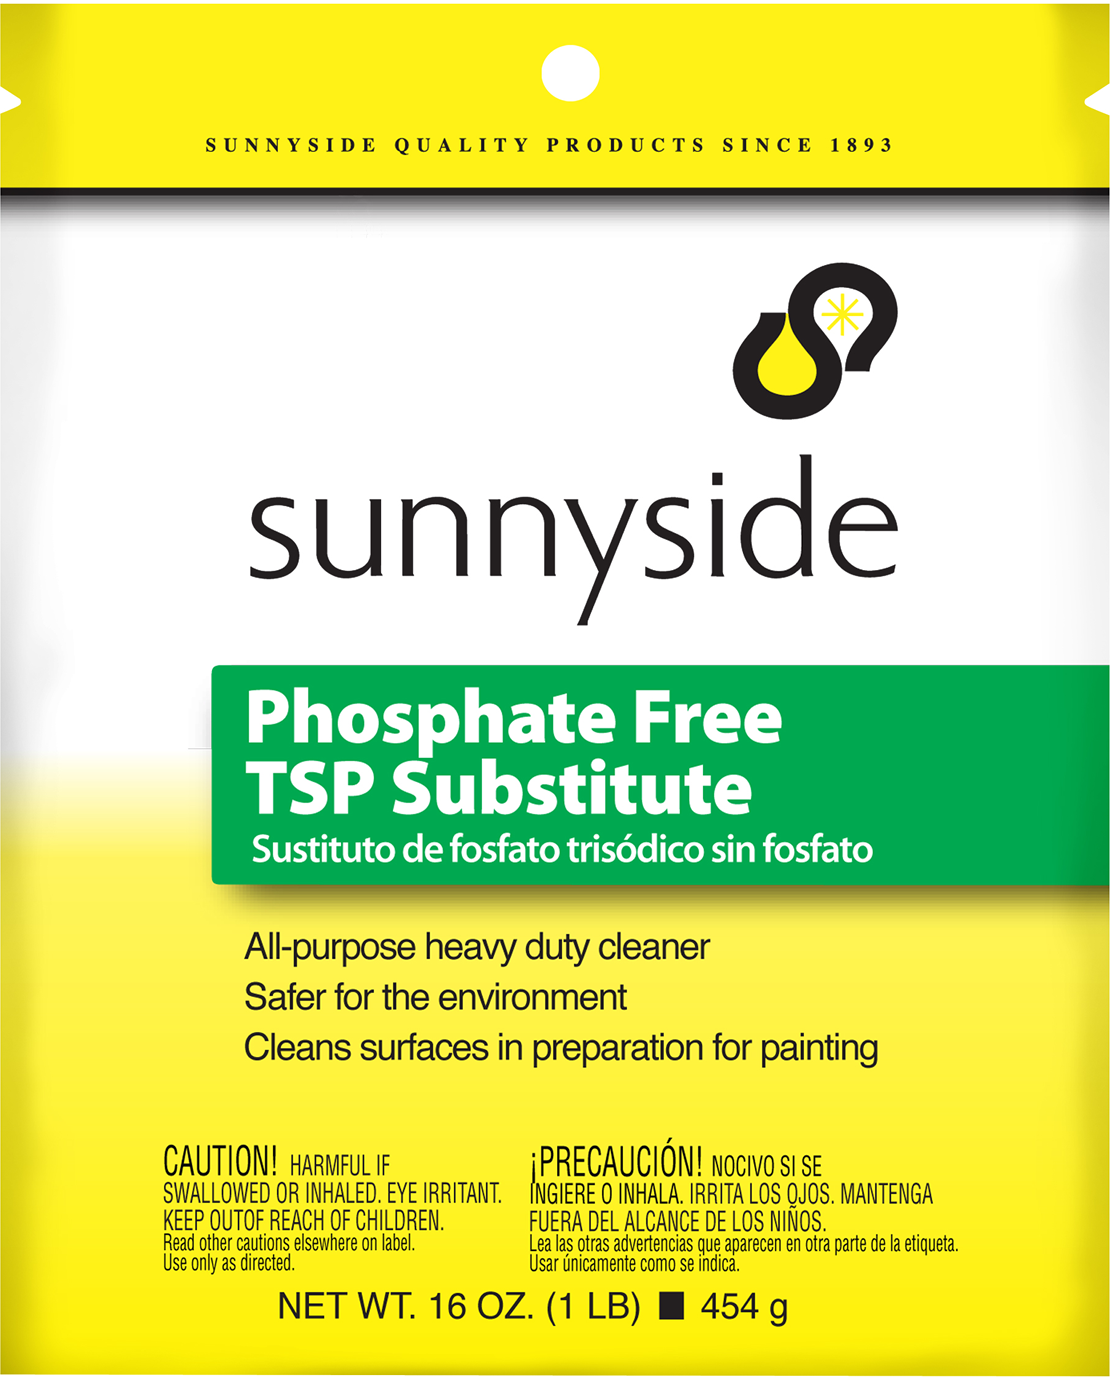 PHOSPHATE FREE TSP SUBSTITUTE Product Image